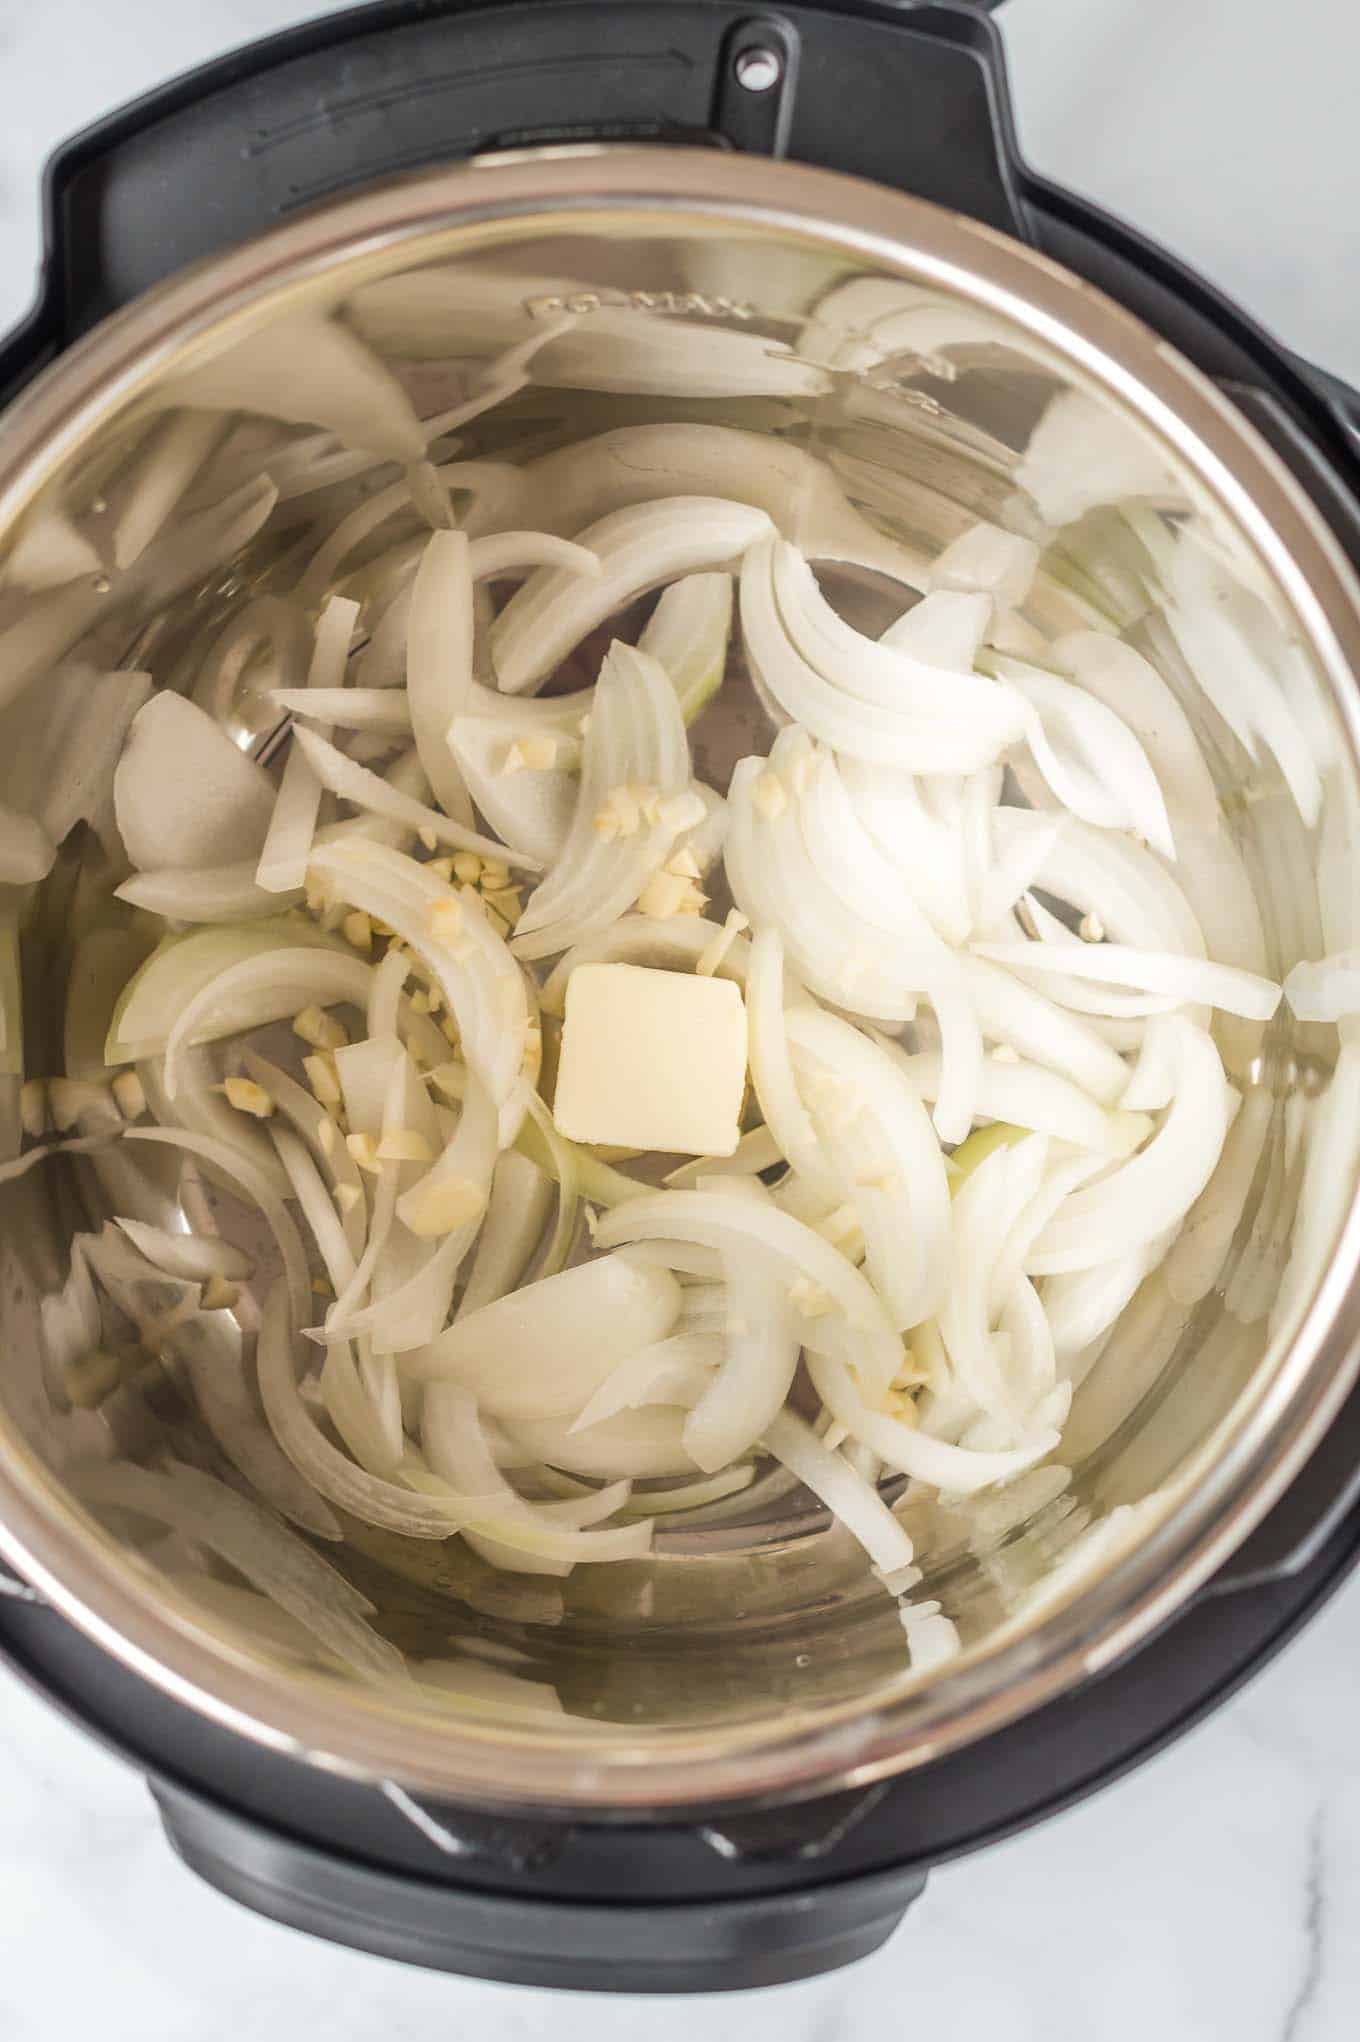 sliced onions, minced garlic, and butter inside an instant pot